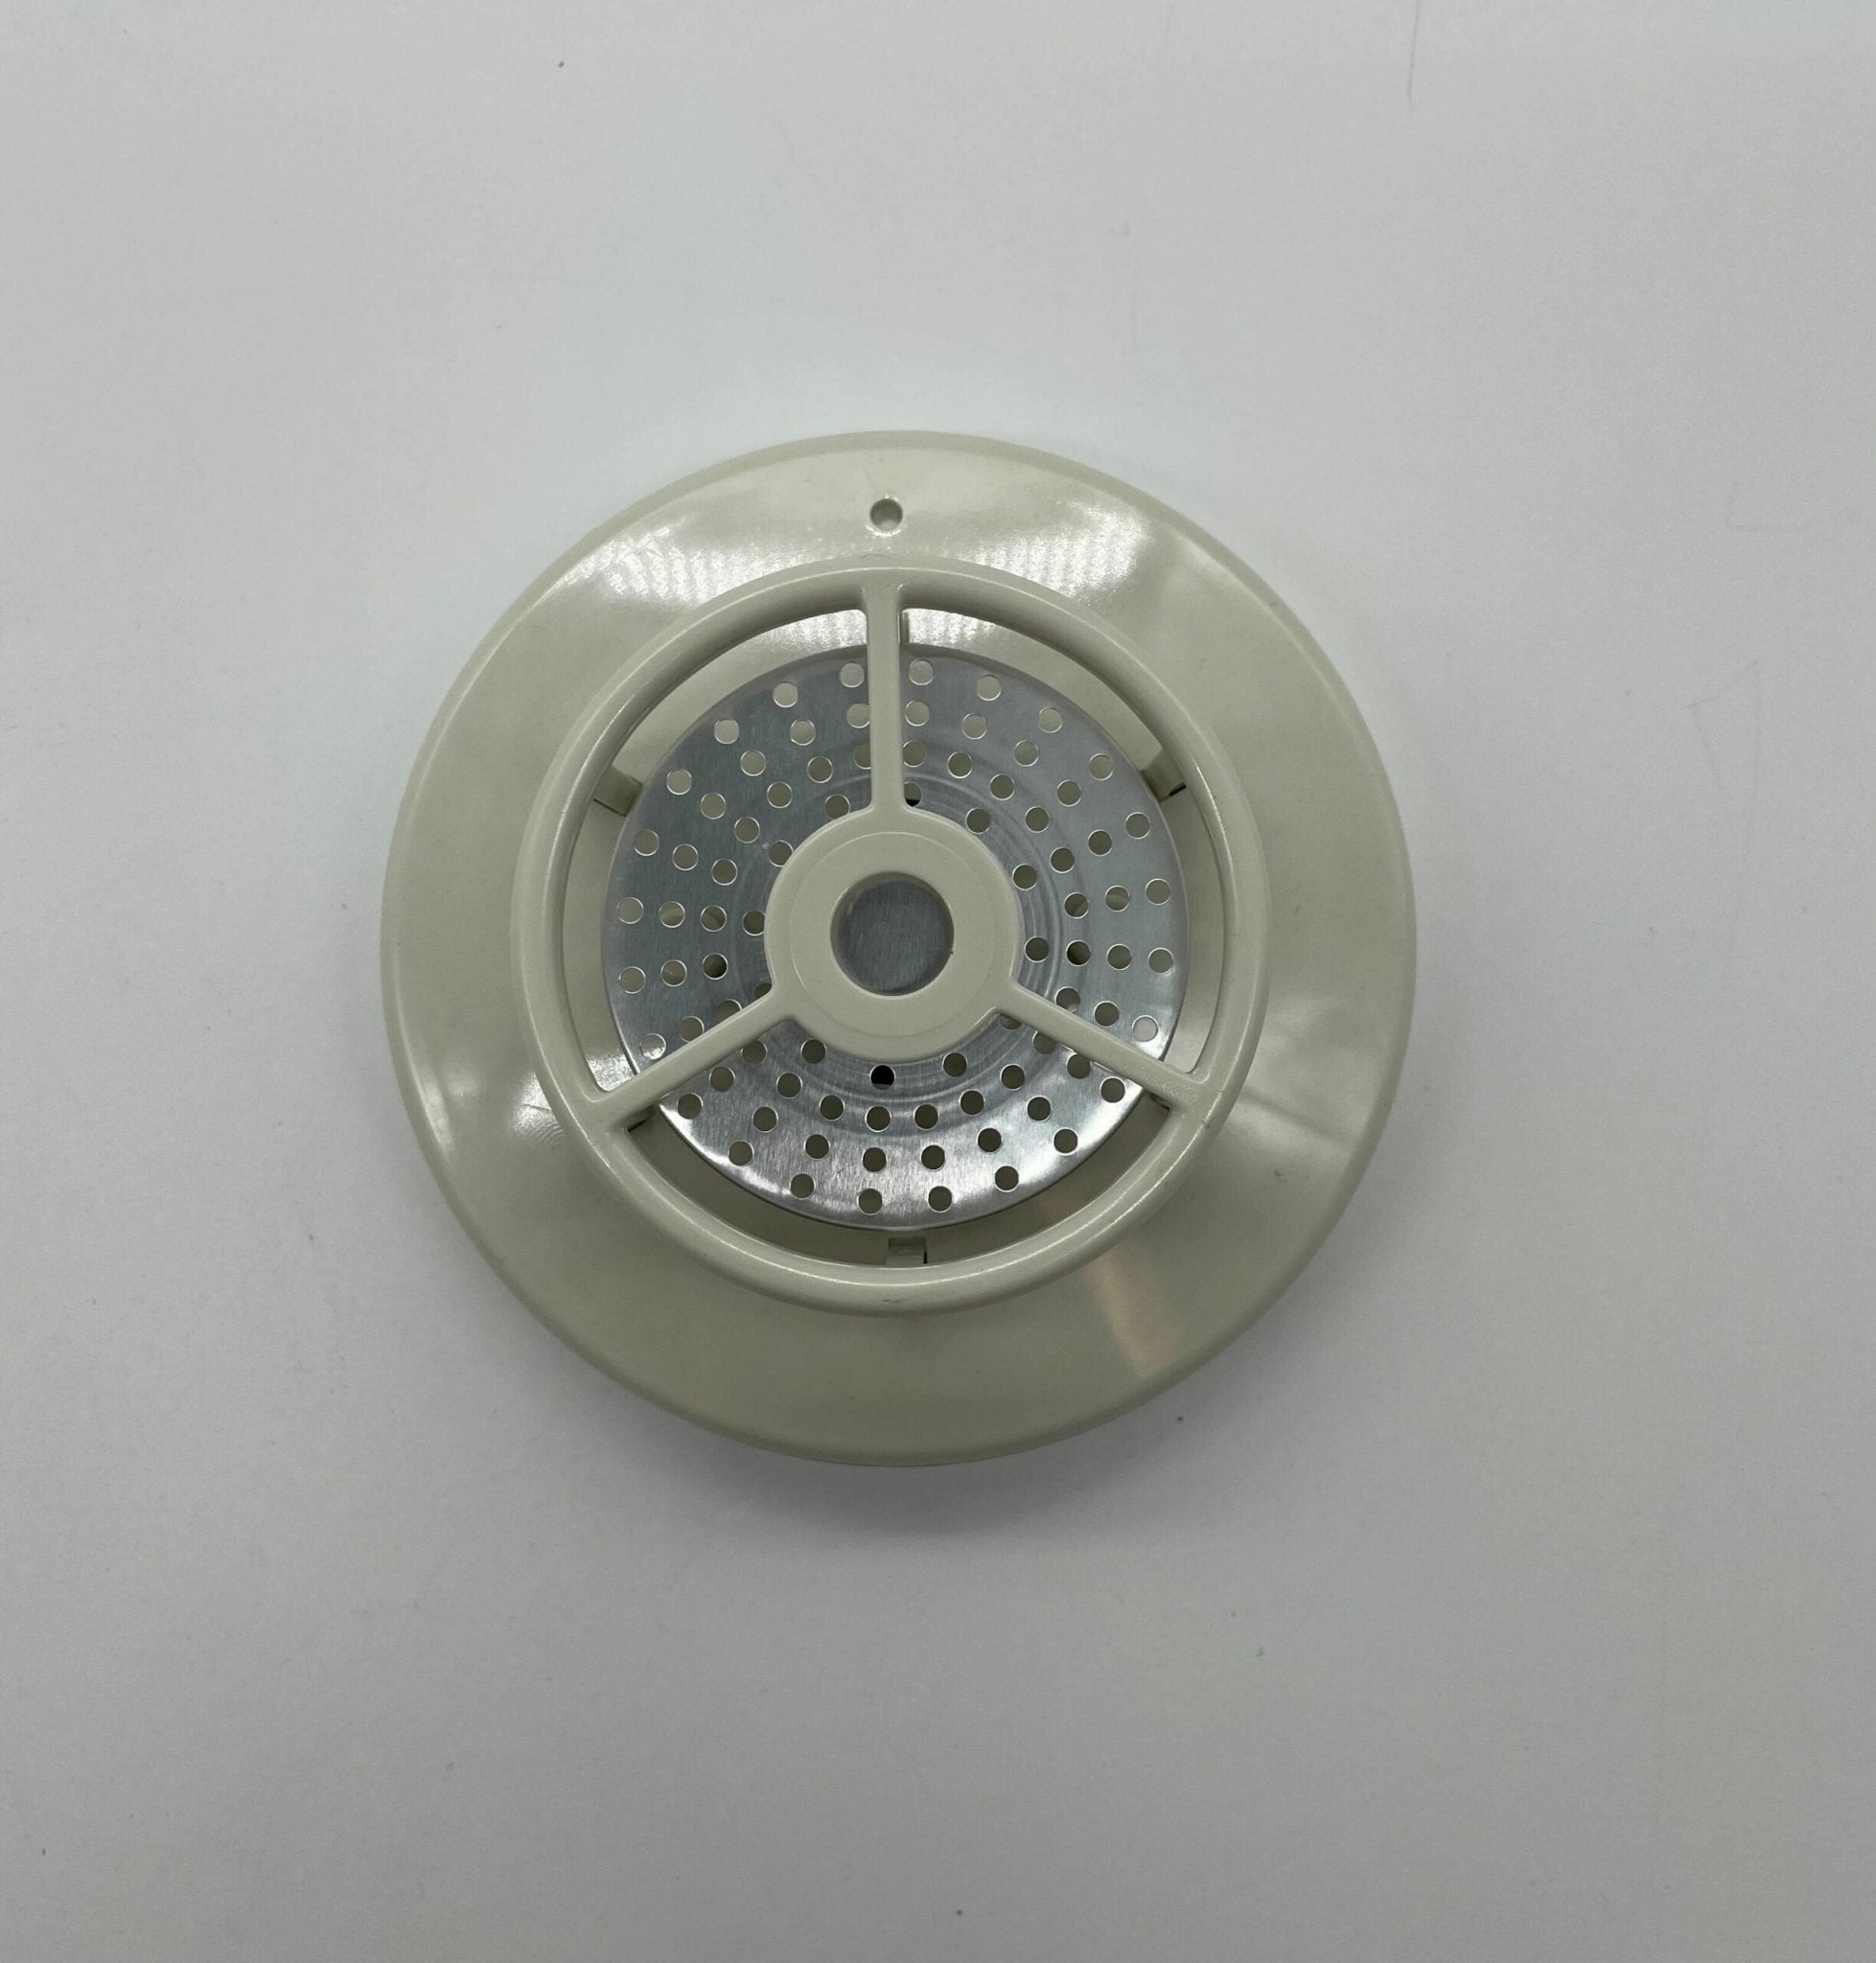 Potter DFE-190 - The Fire Alarm Supplier